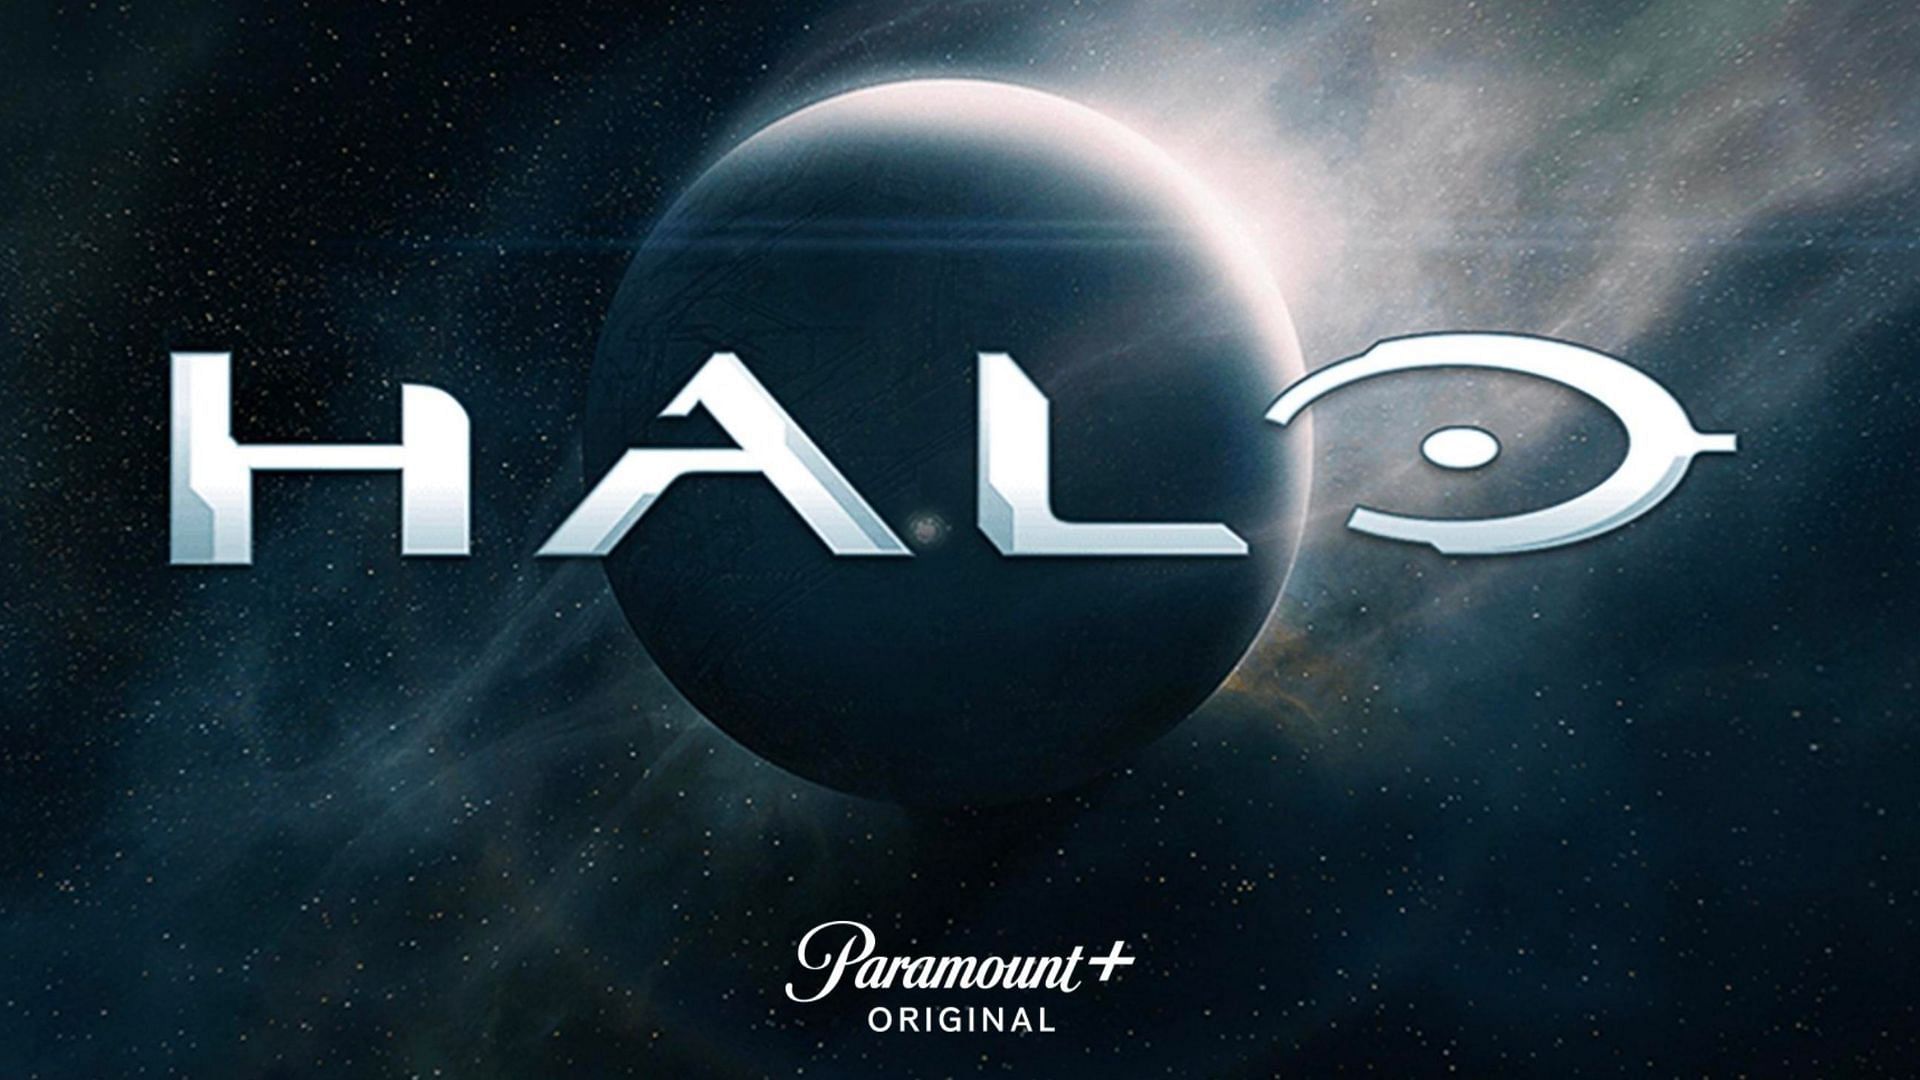 There will be many revelations in Halo season 2 episode 3 (Image via Paramount+)